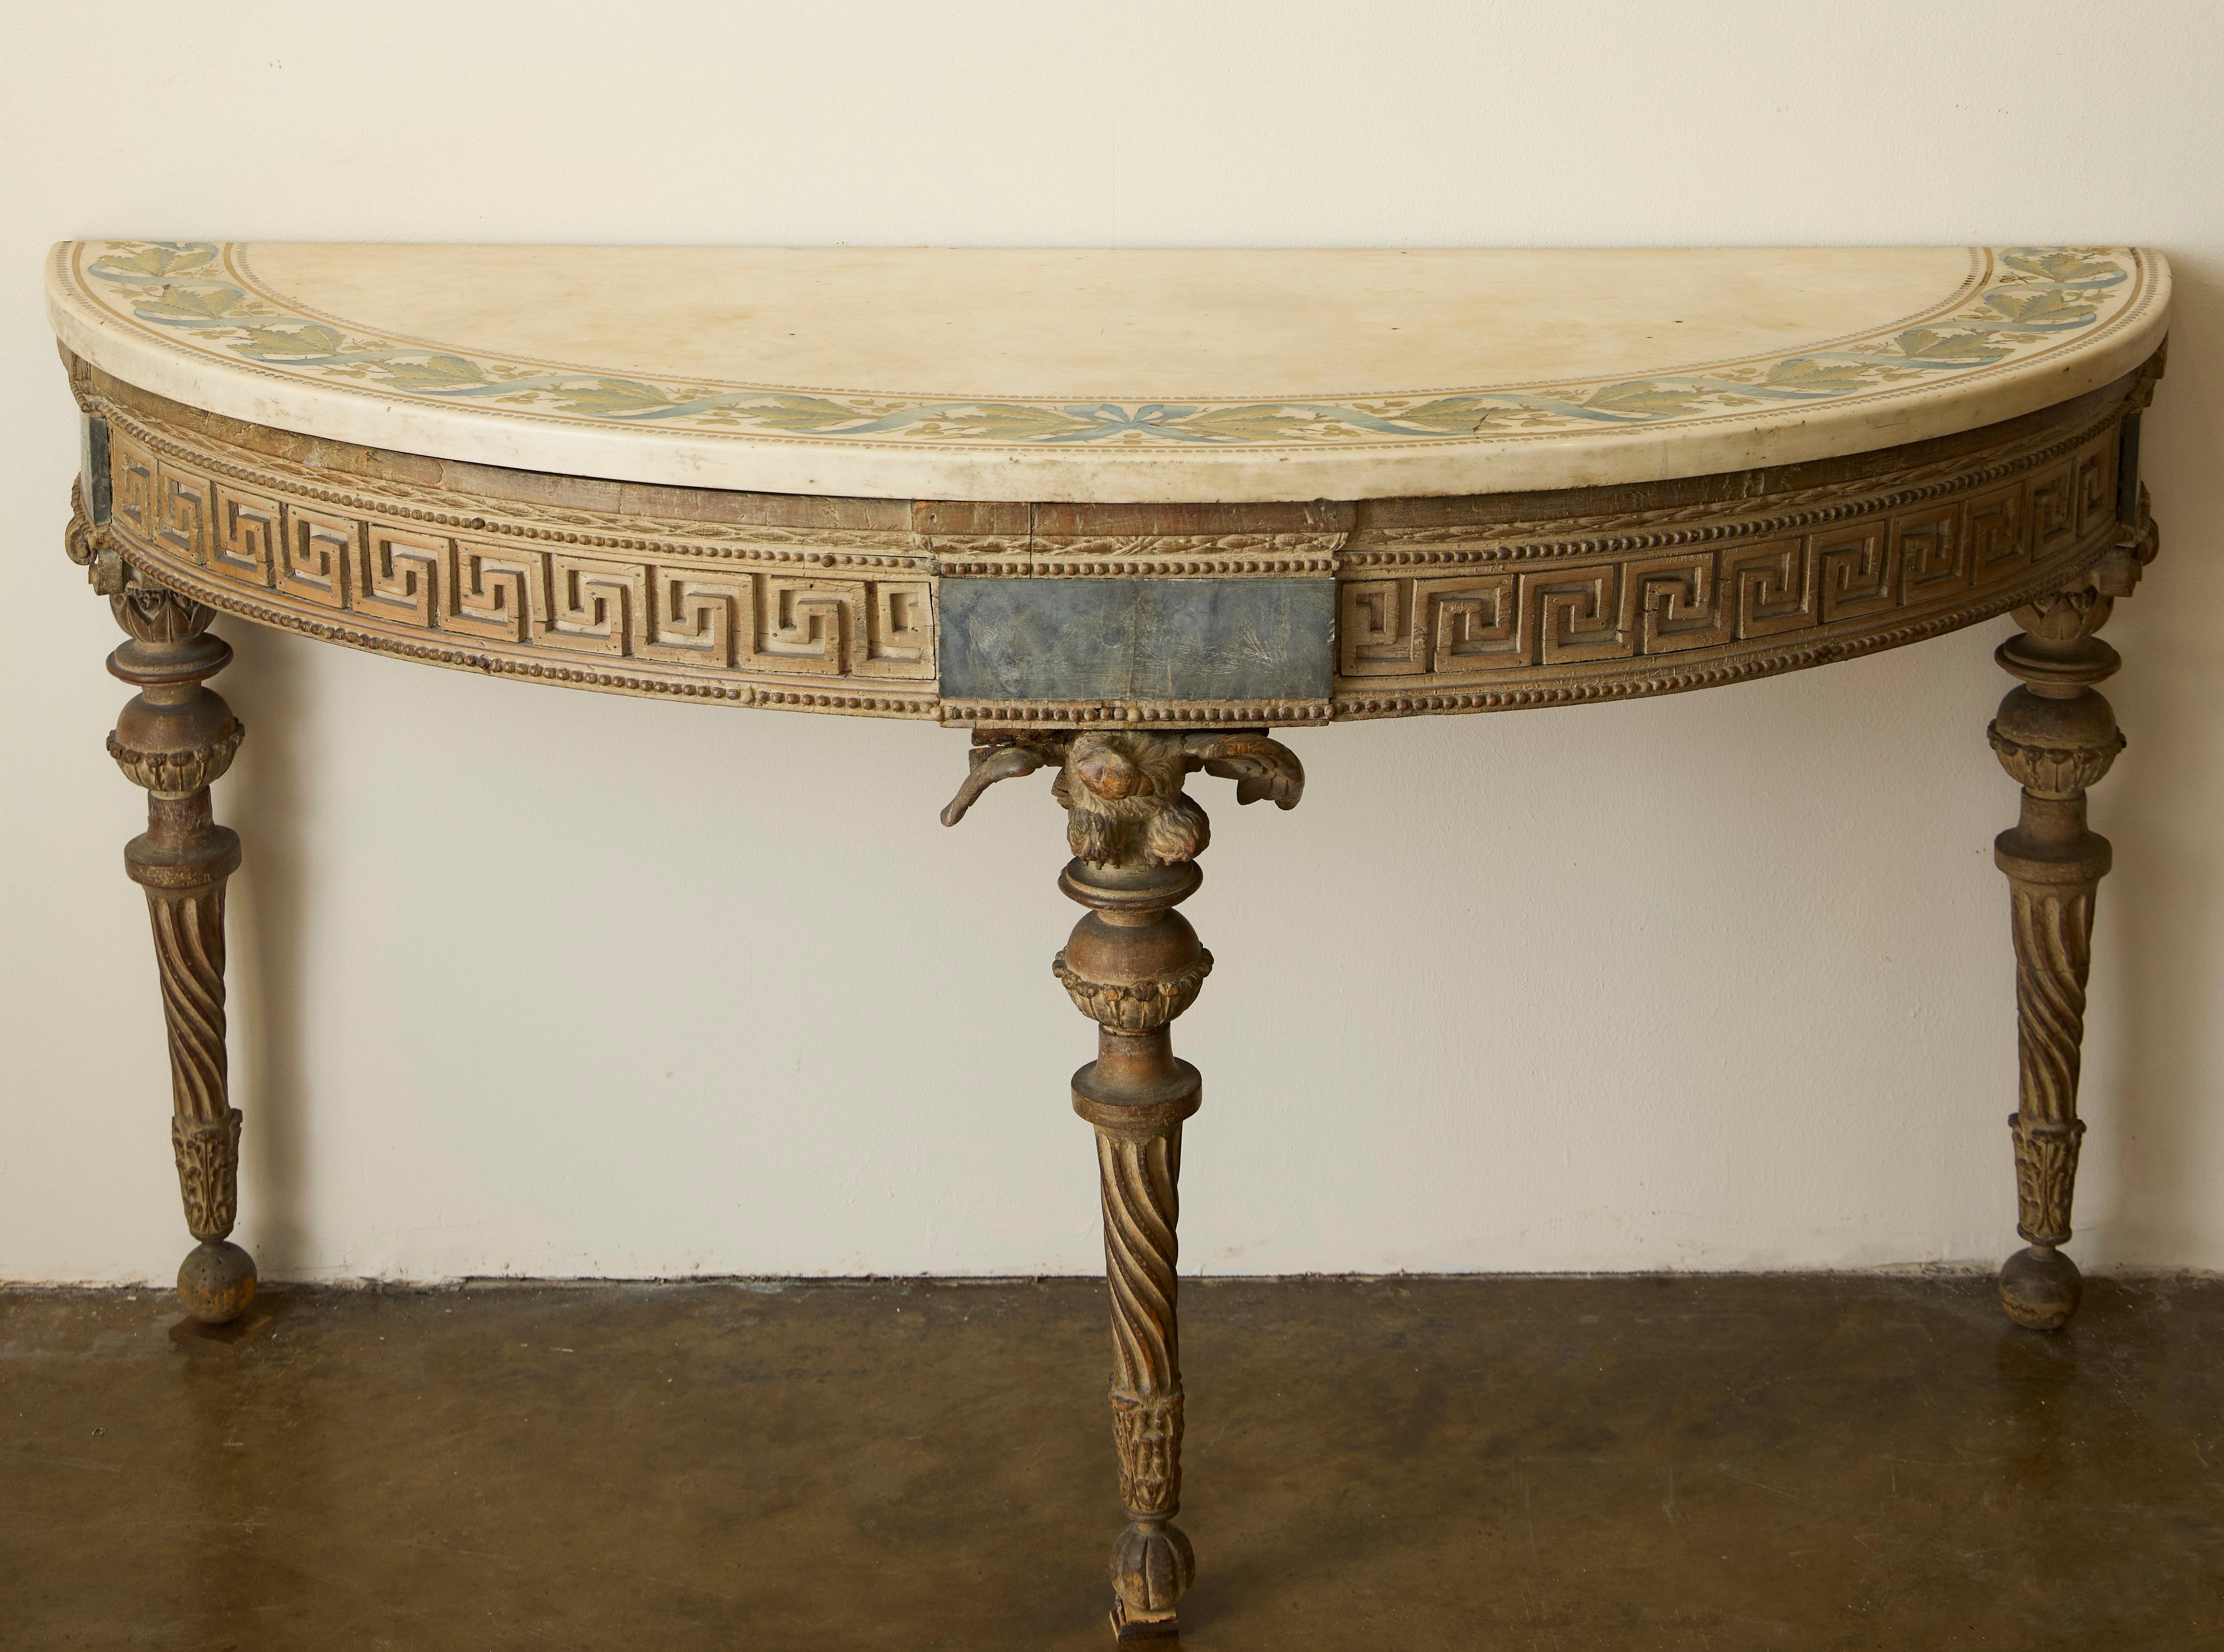 a highly carved Piedmontese side table / console (once gilded) with English demi-lune white marble and scagliola top with blue ribboned oak-leaf band within a pearled (pearl strings) edge above a laurel band and a pierced Grecian / Greek Key frieze